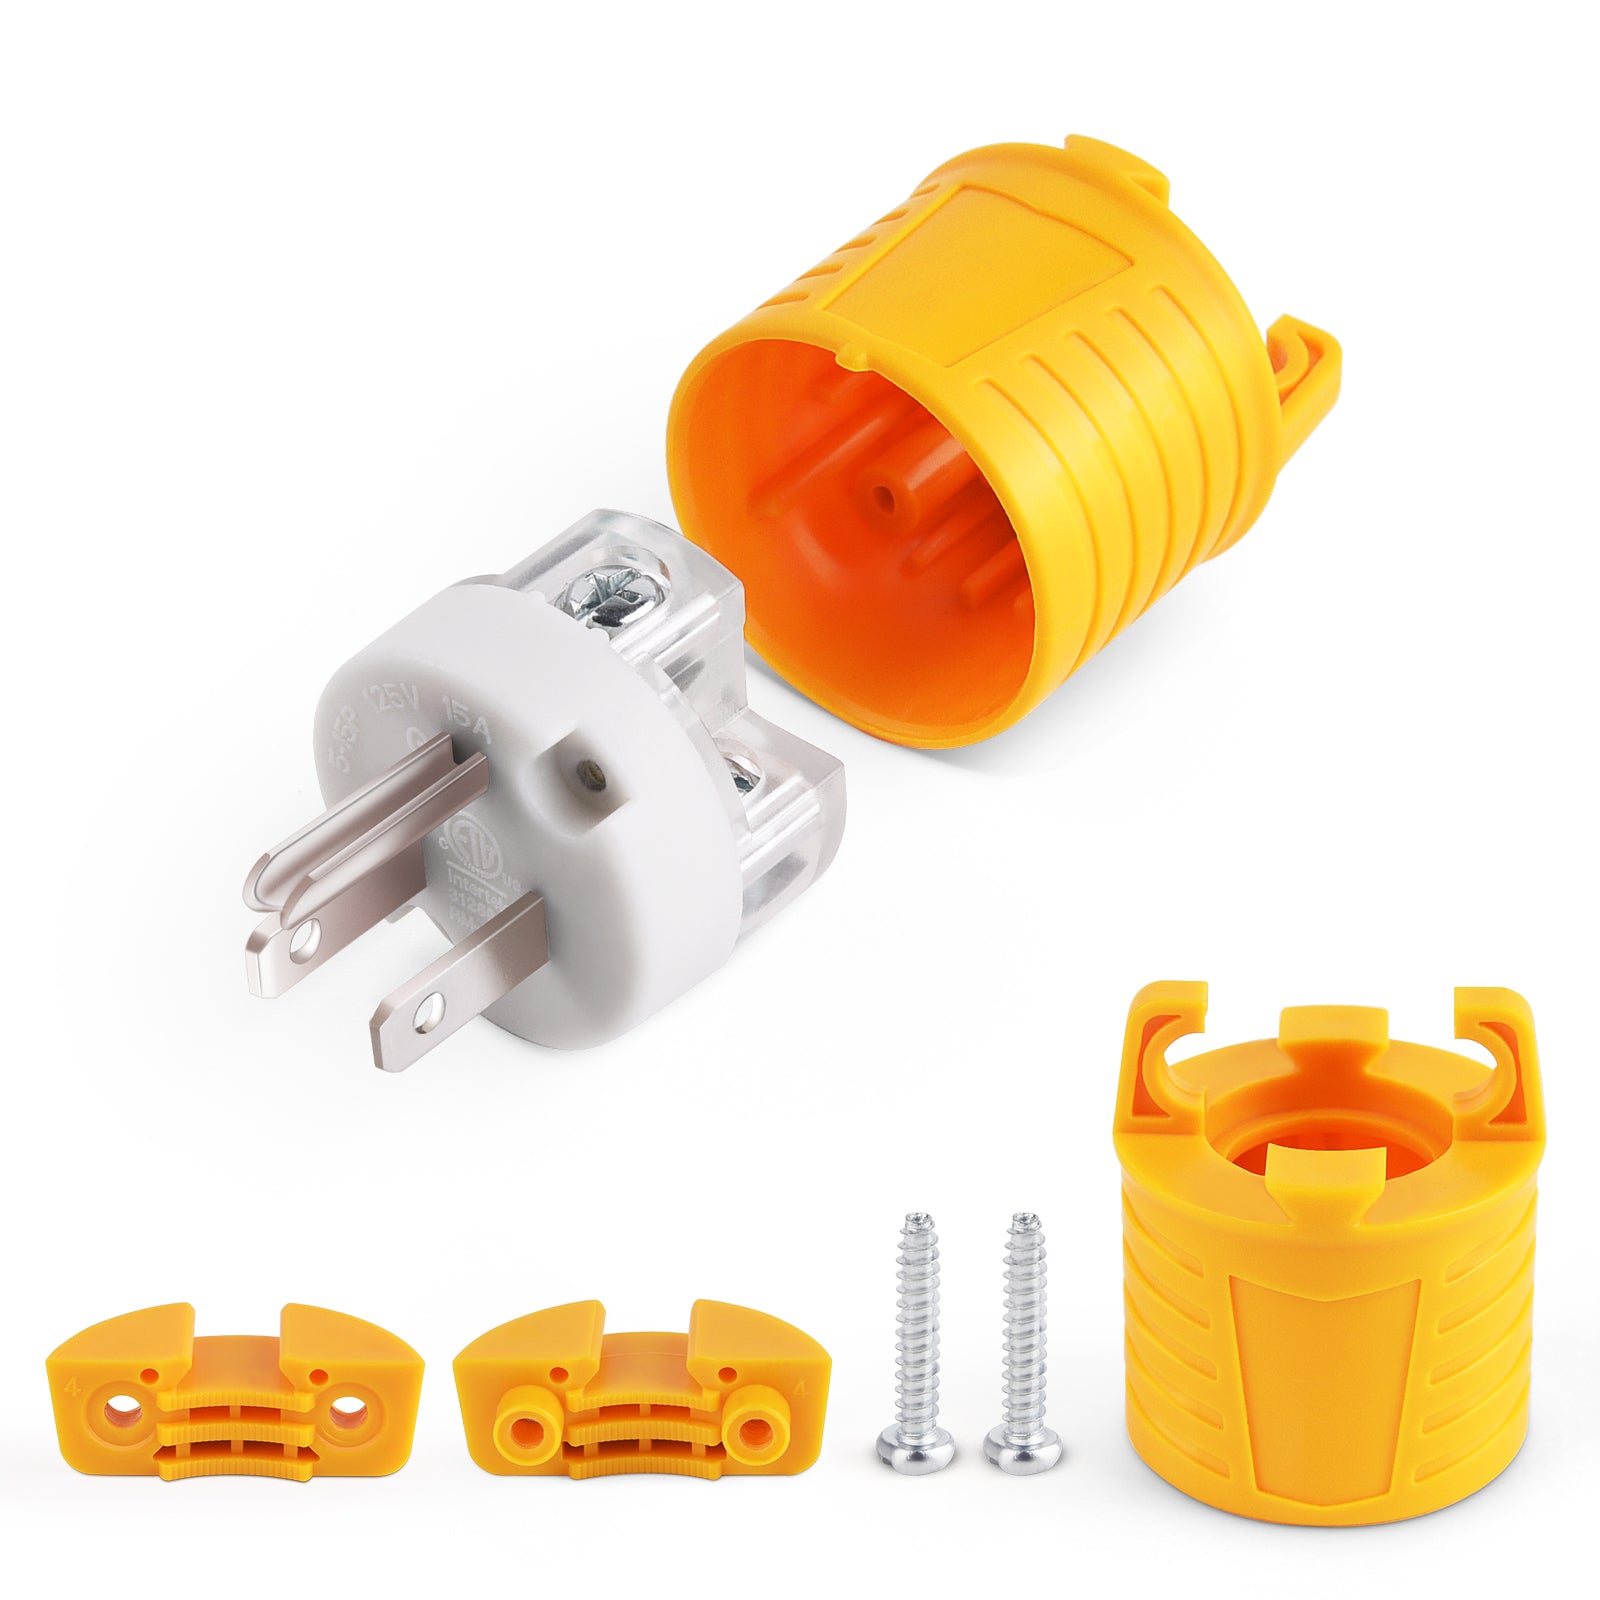 Extension Cord Ends Male and Female Replacement Plug & Connector Set, 15 Amp 125 Volt Heavy Duty Straight Blade Electrical Plug Grounding